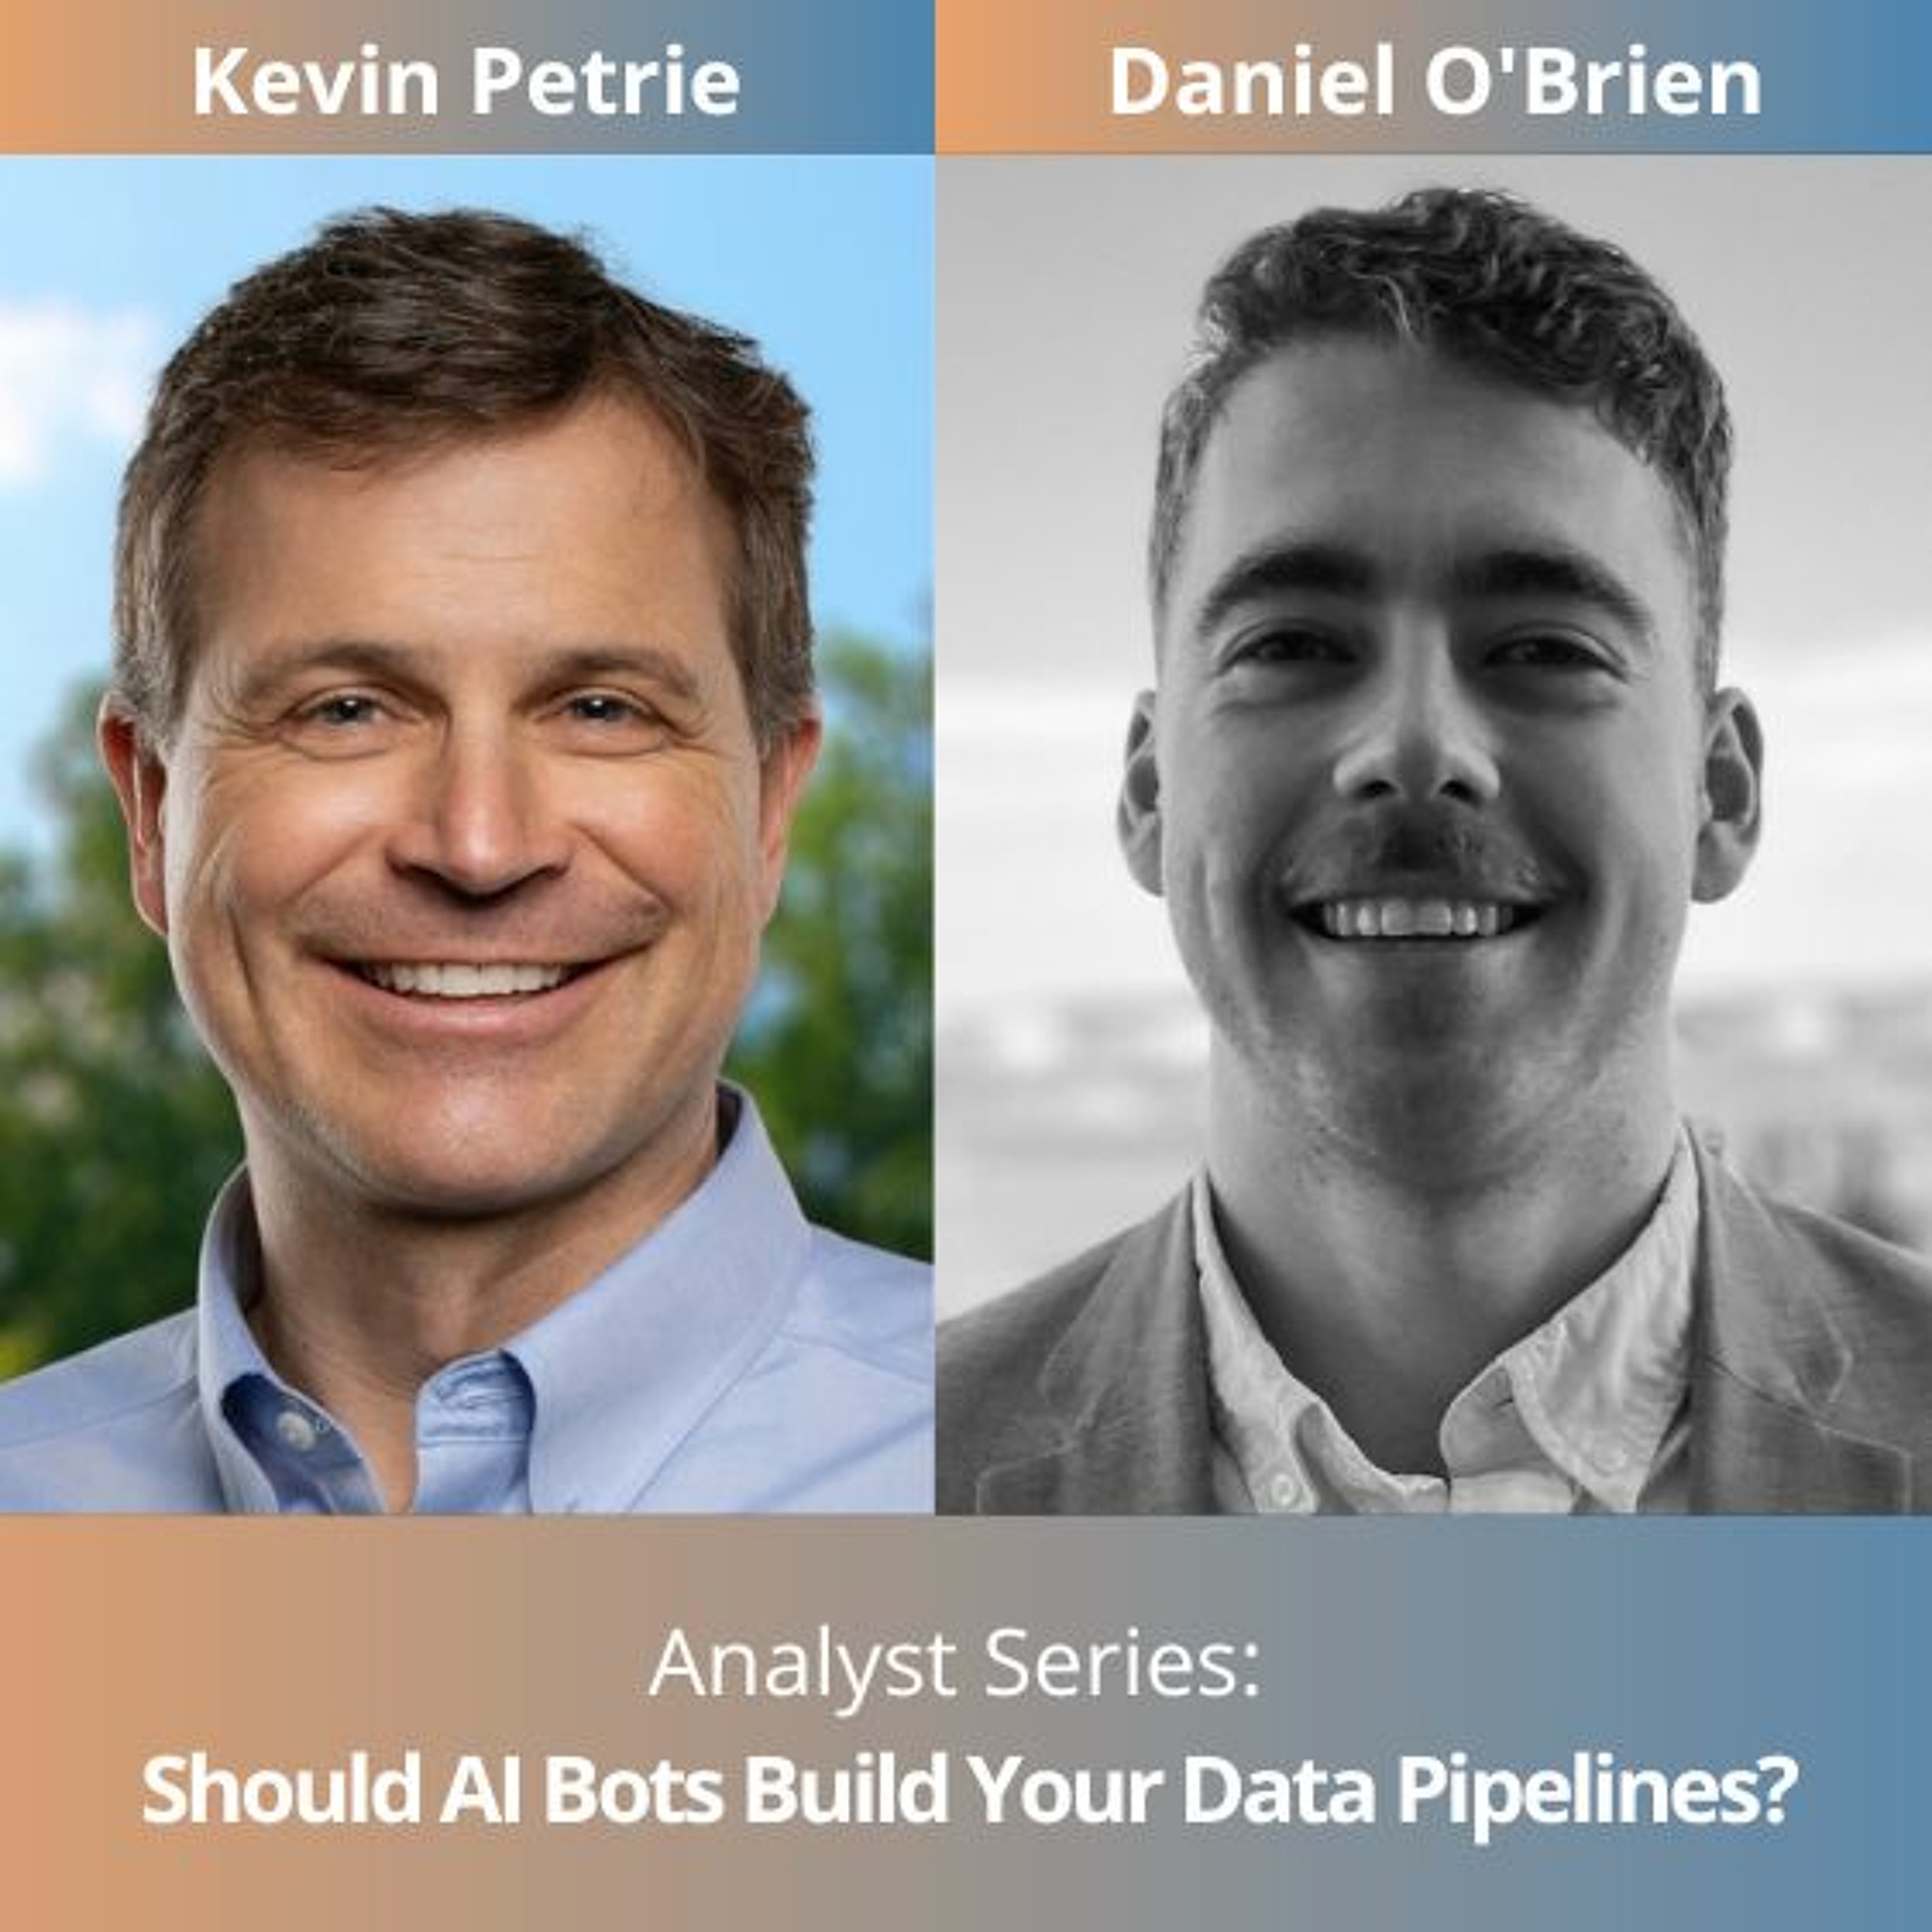 Analyst Series: Should AI Bots Build Your Data Pipelines?